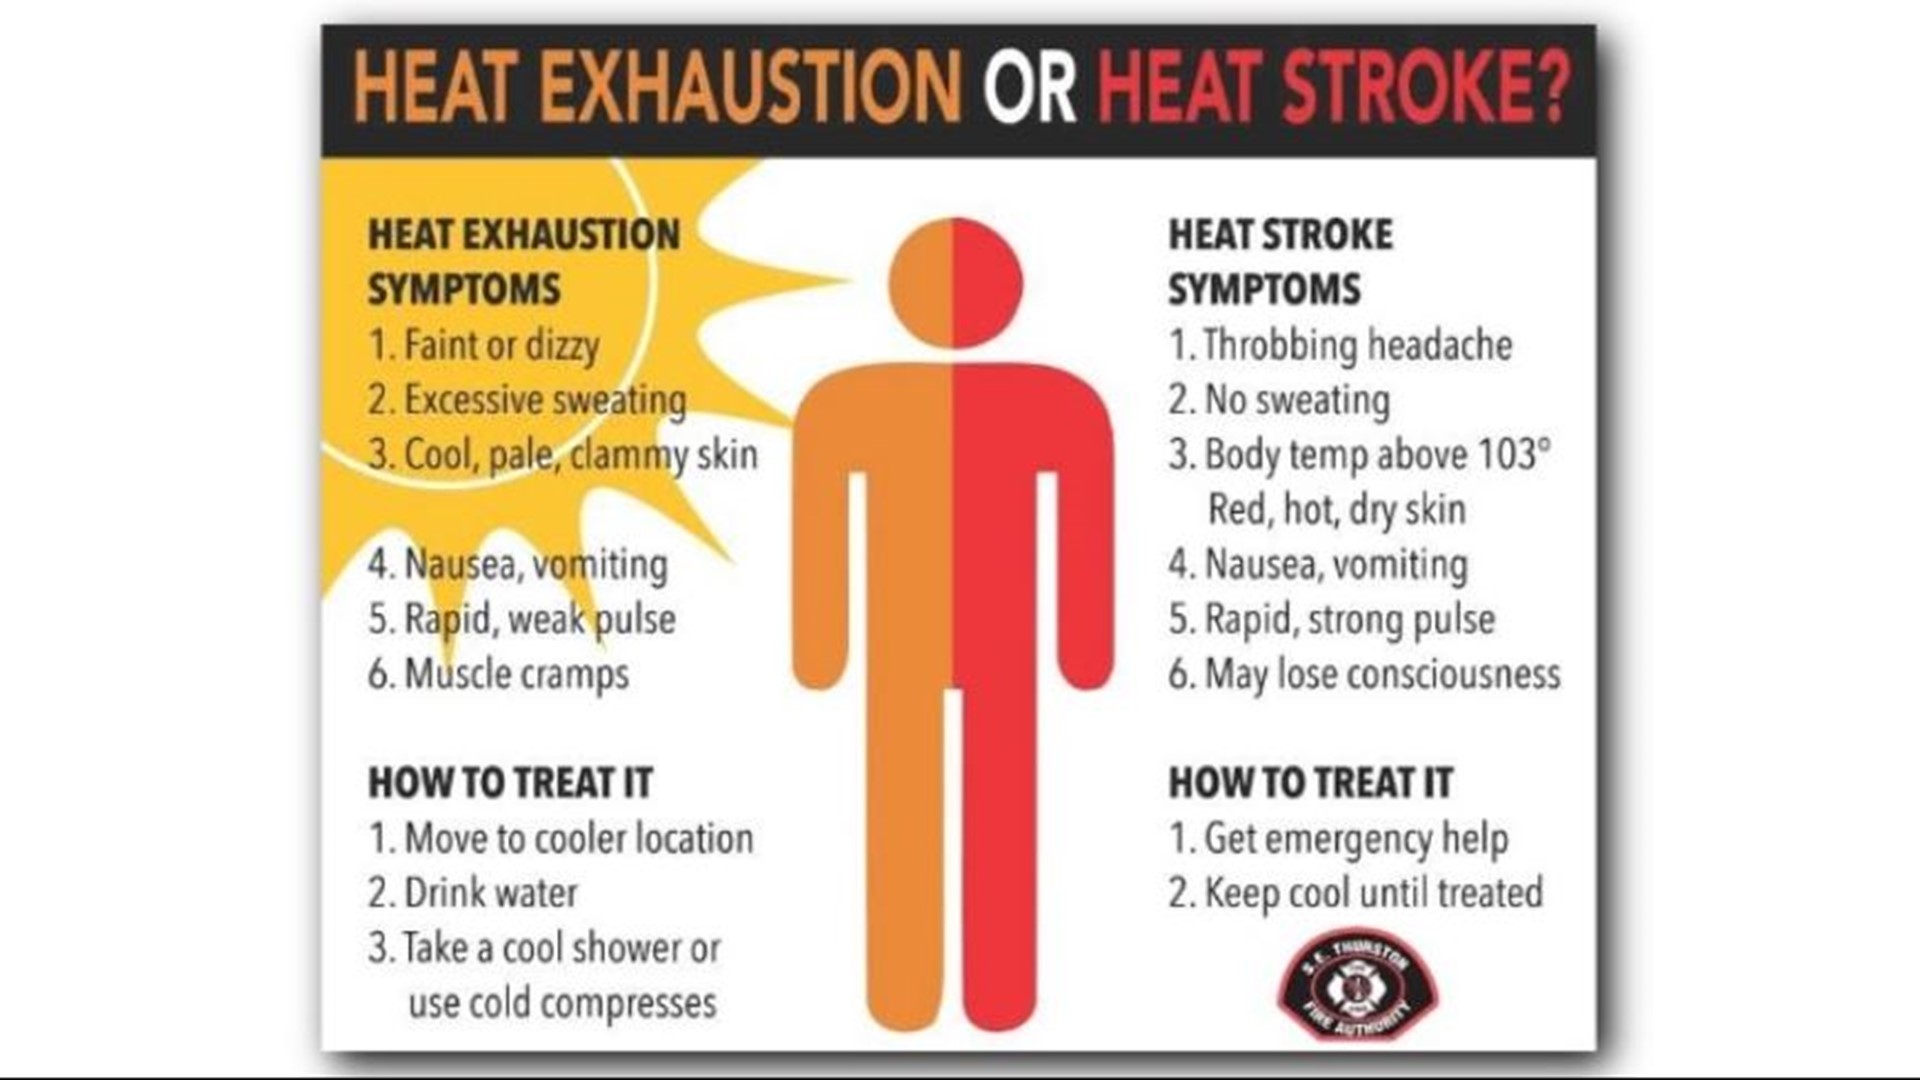 Heat and health: How to stay safe as temperatures rise | king5.com